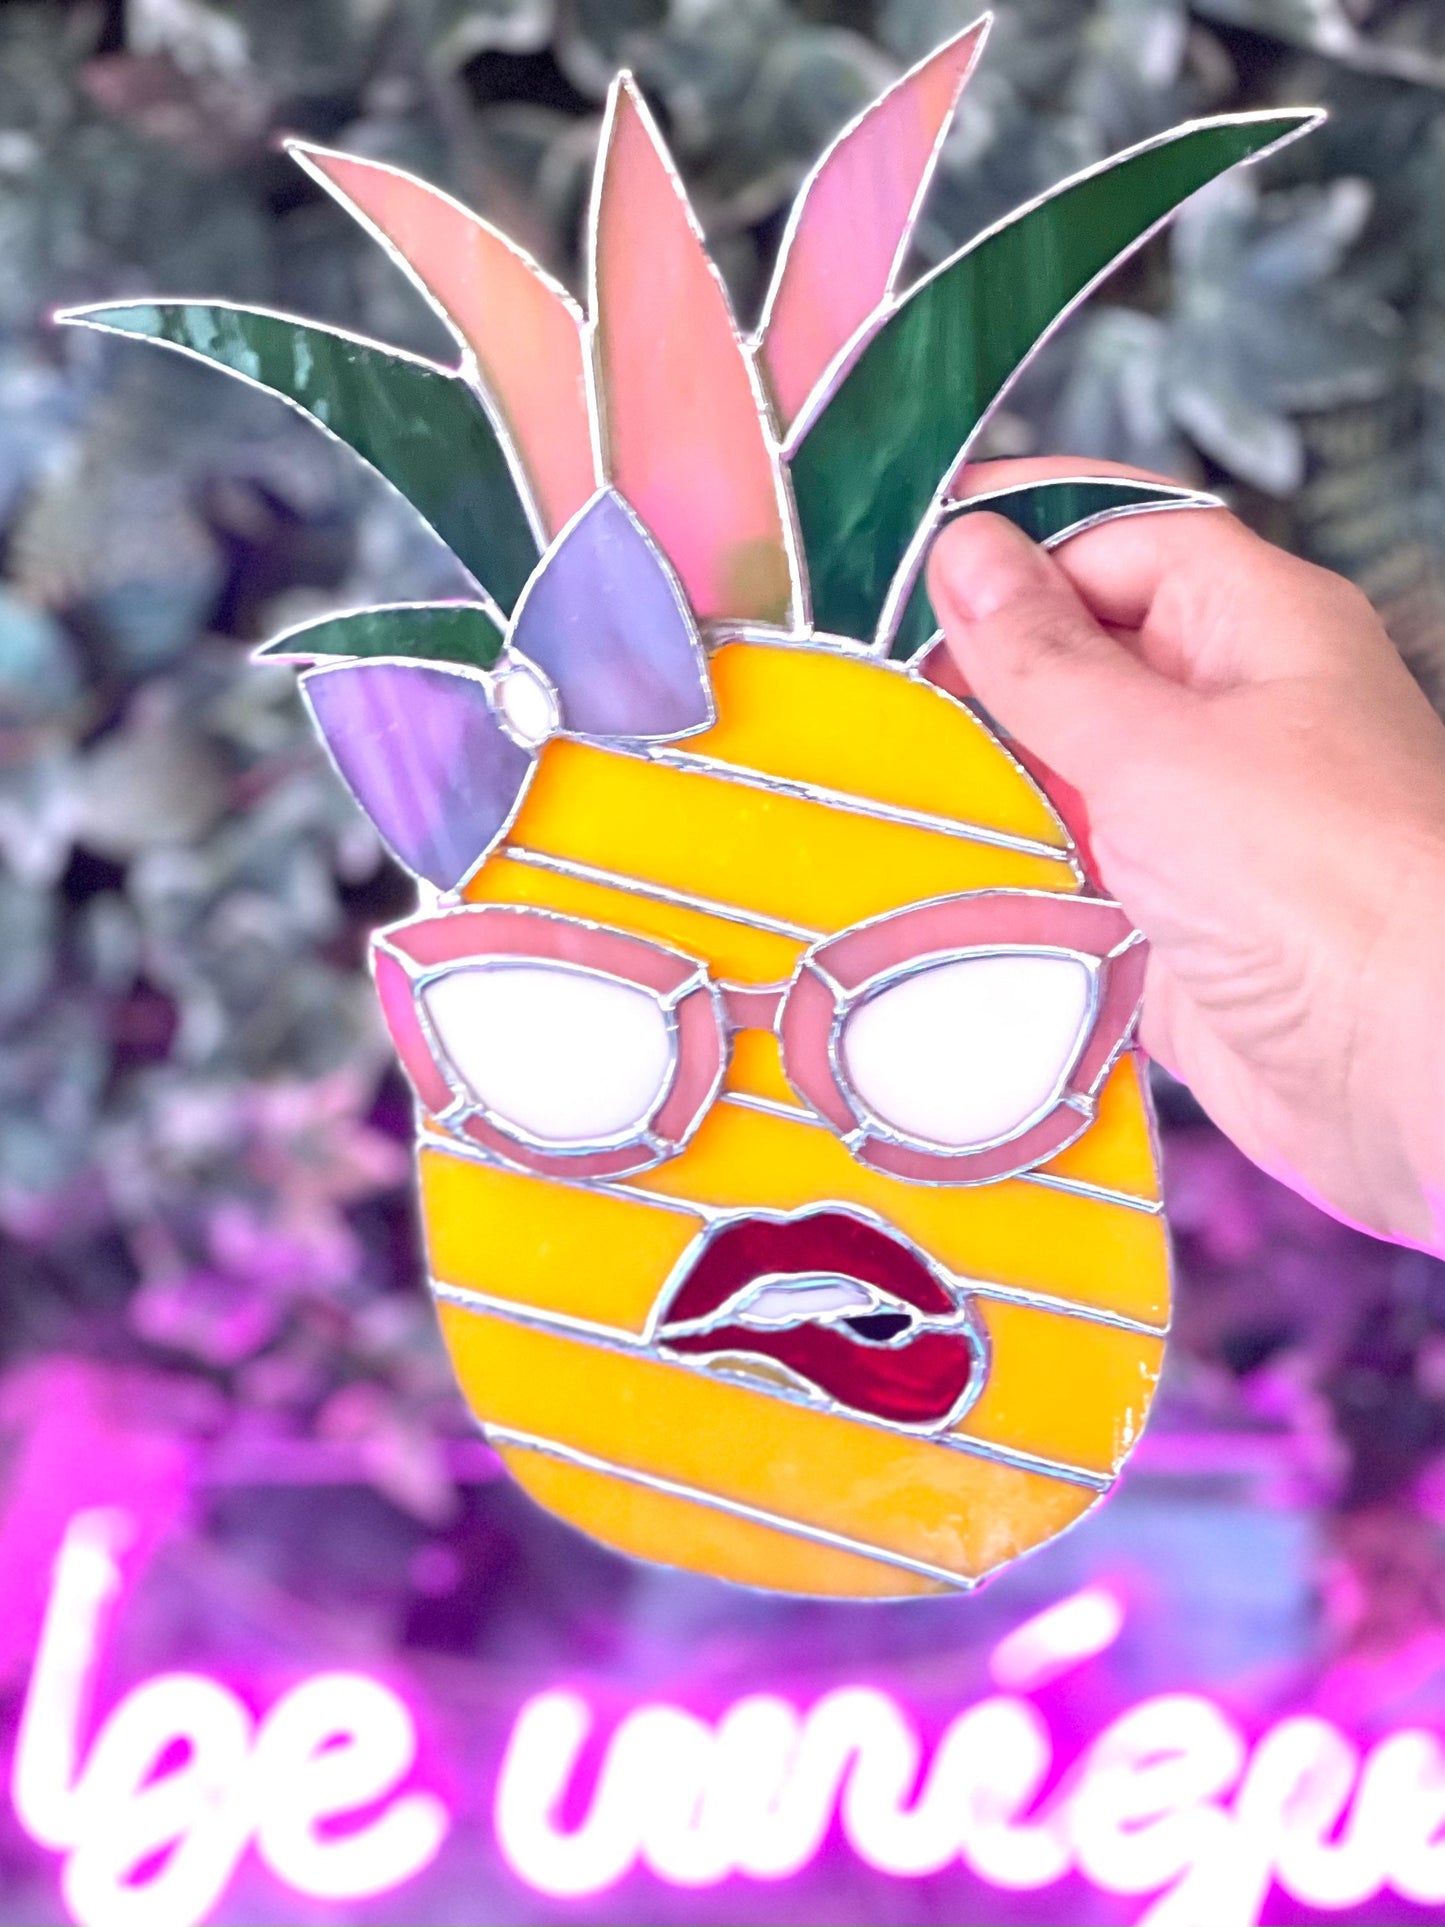 Stained Glass Pineapple Pattern • Unique 3D Miss Pineapple Pattern